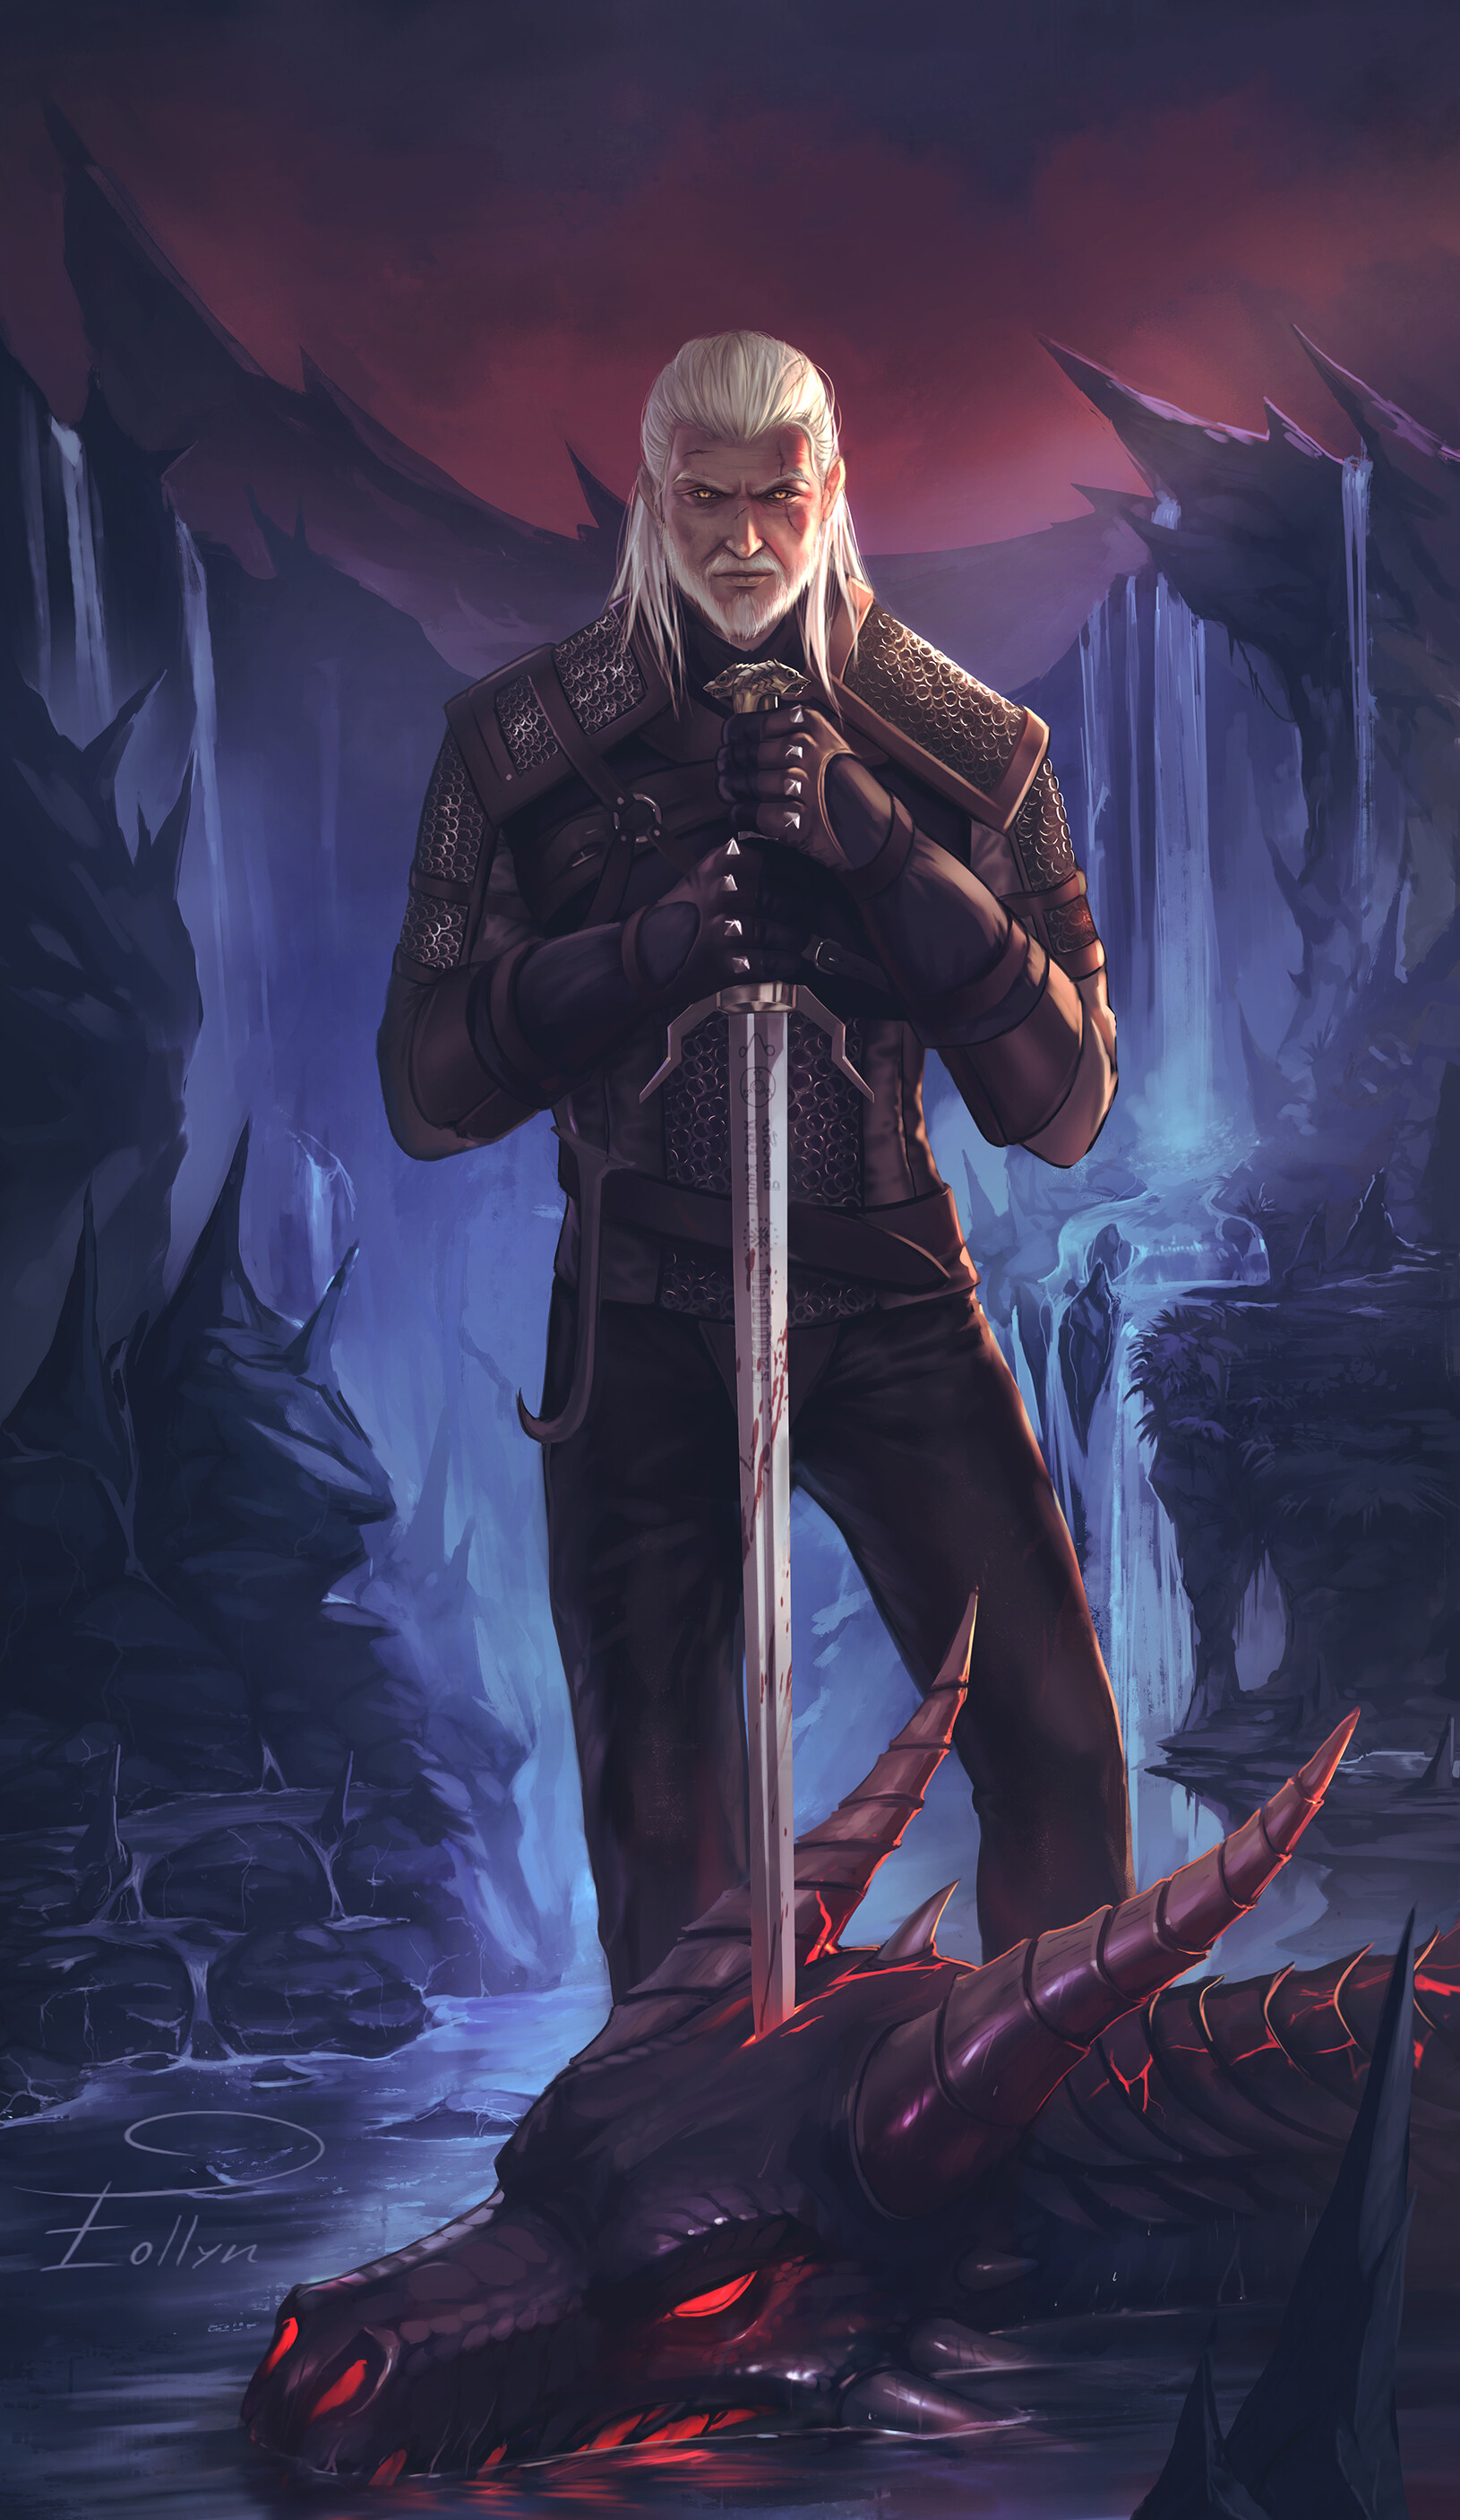 General 1630x2813 Geralt of Rivia The Witcher The Witcher 3: Wild Hunt video game characters